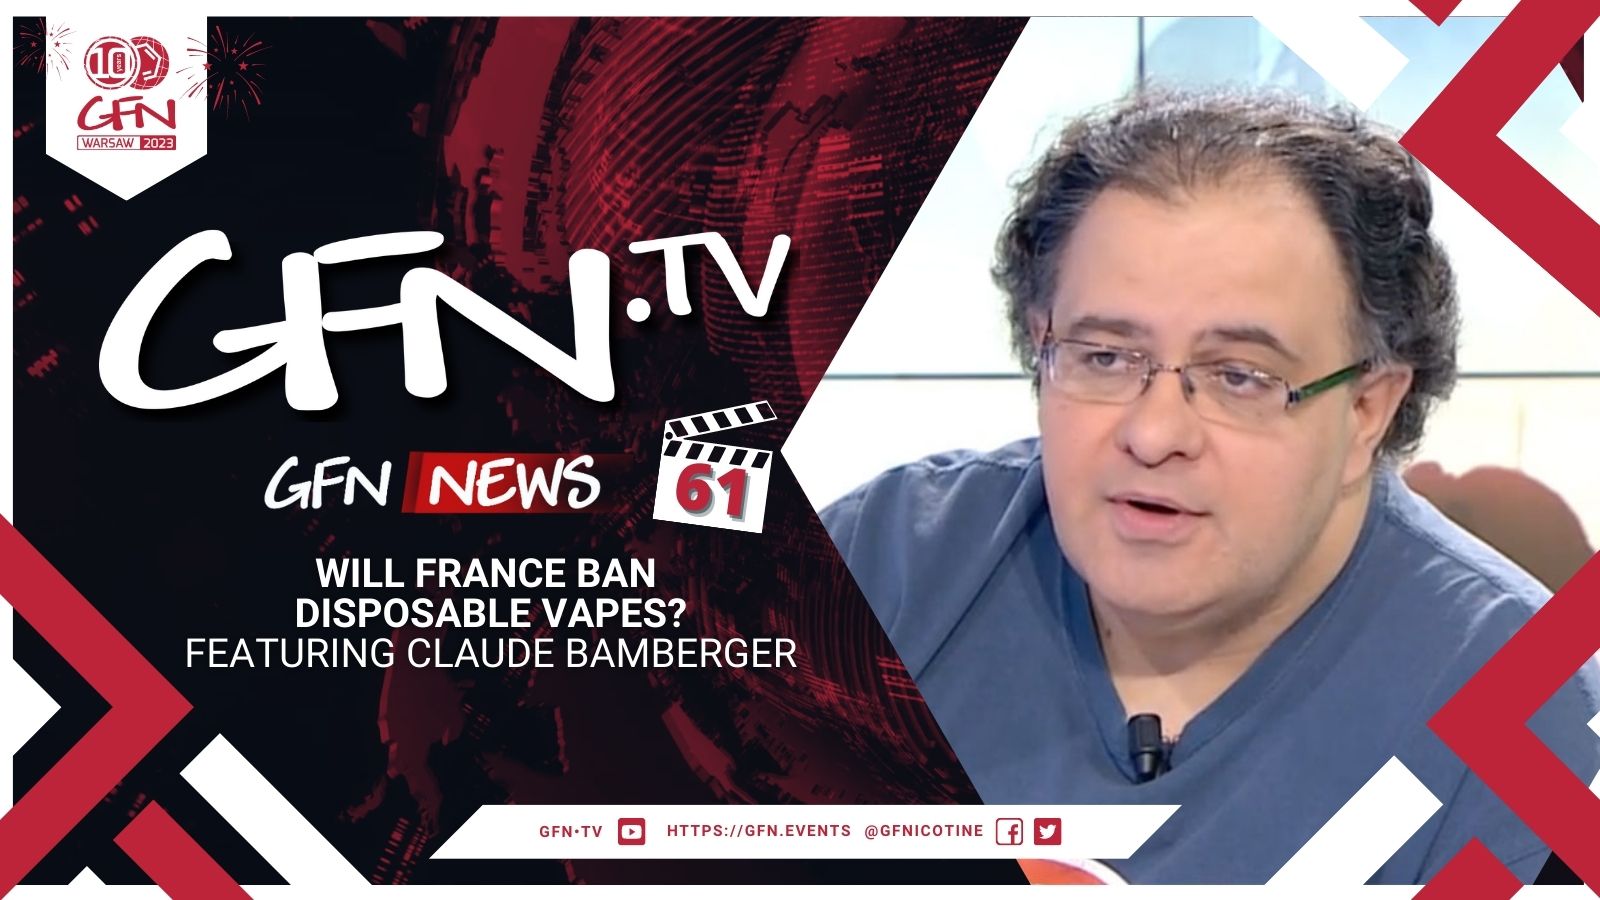 GFN News #61 | WILL FRANCE BAN DISPOSABLE VAPES? | Featuring Claude Bamberger